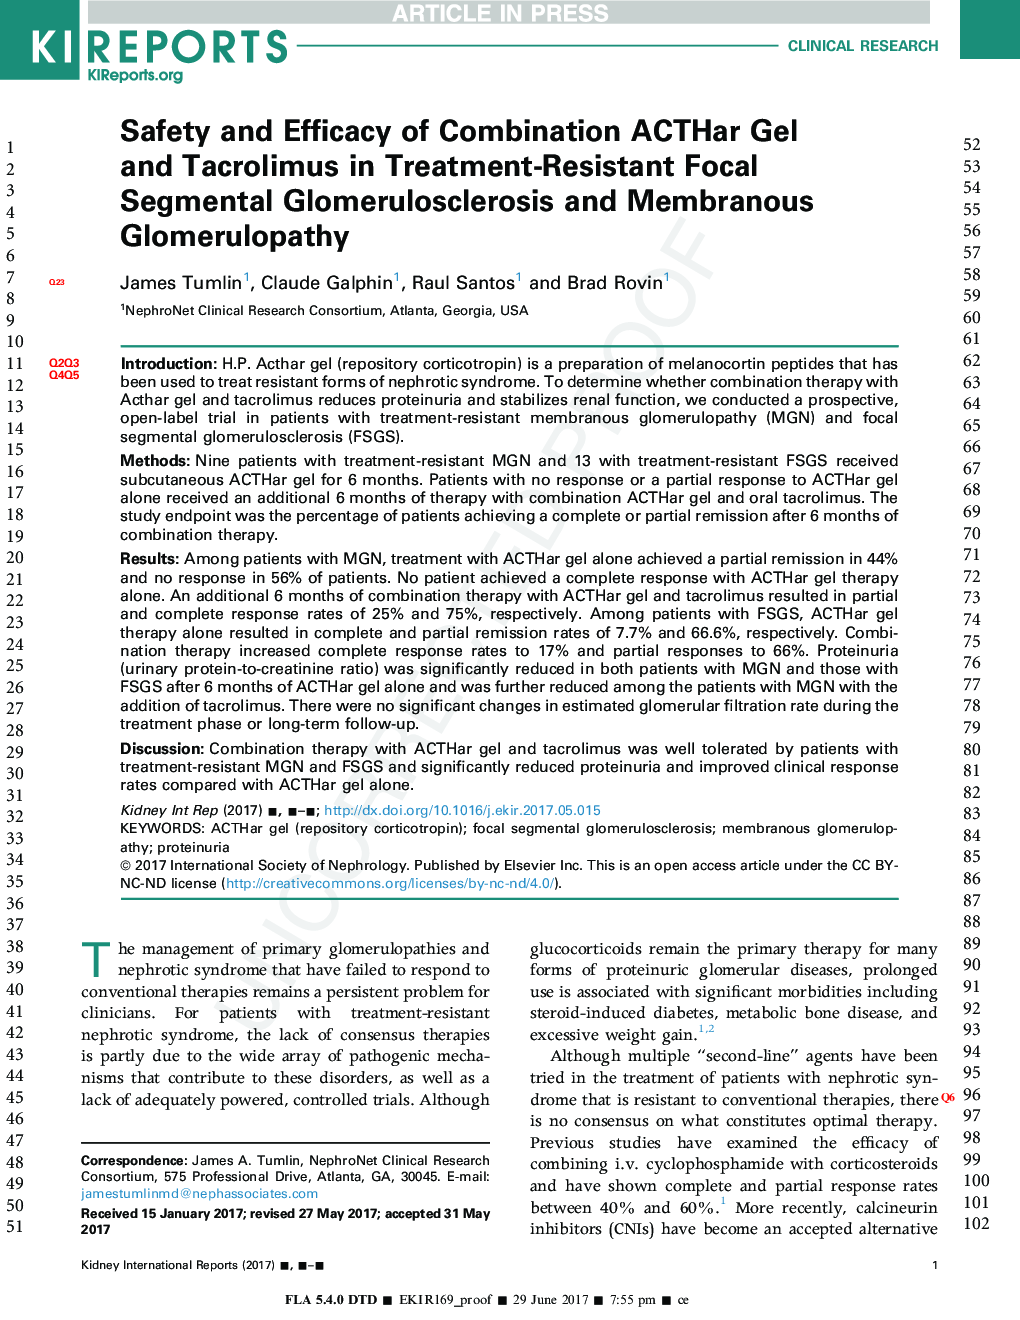 Safety and Efficacy of Combination ACTHar Gel and Tacrolimus in Treatment-Resistant Focal Segmental Glomerulosclerosis and Membranous Glomerulopathy